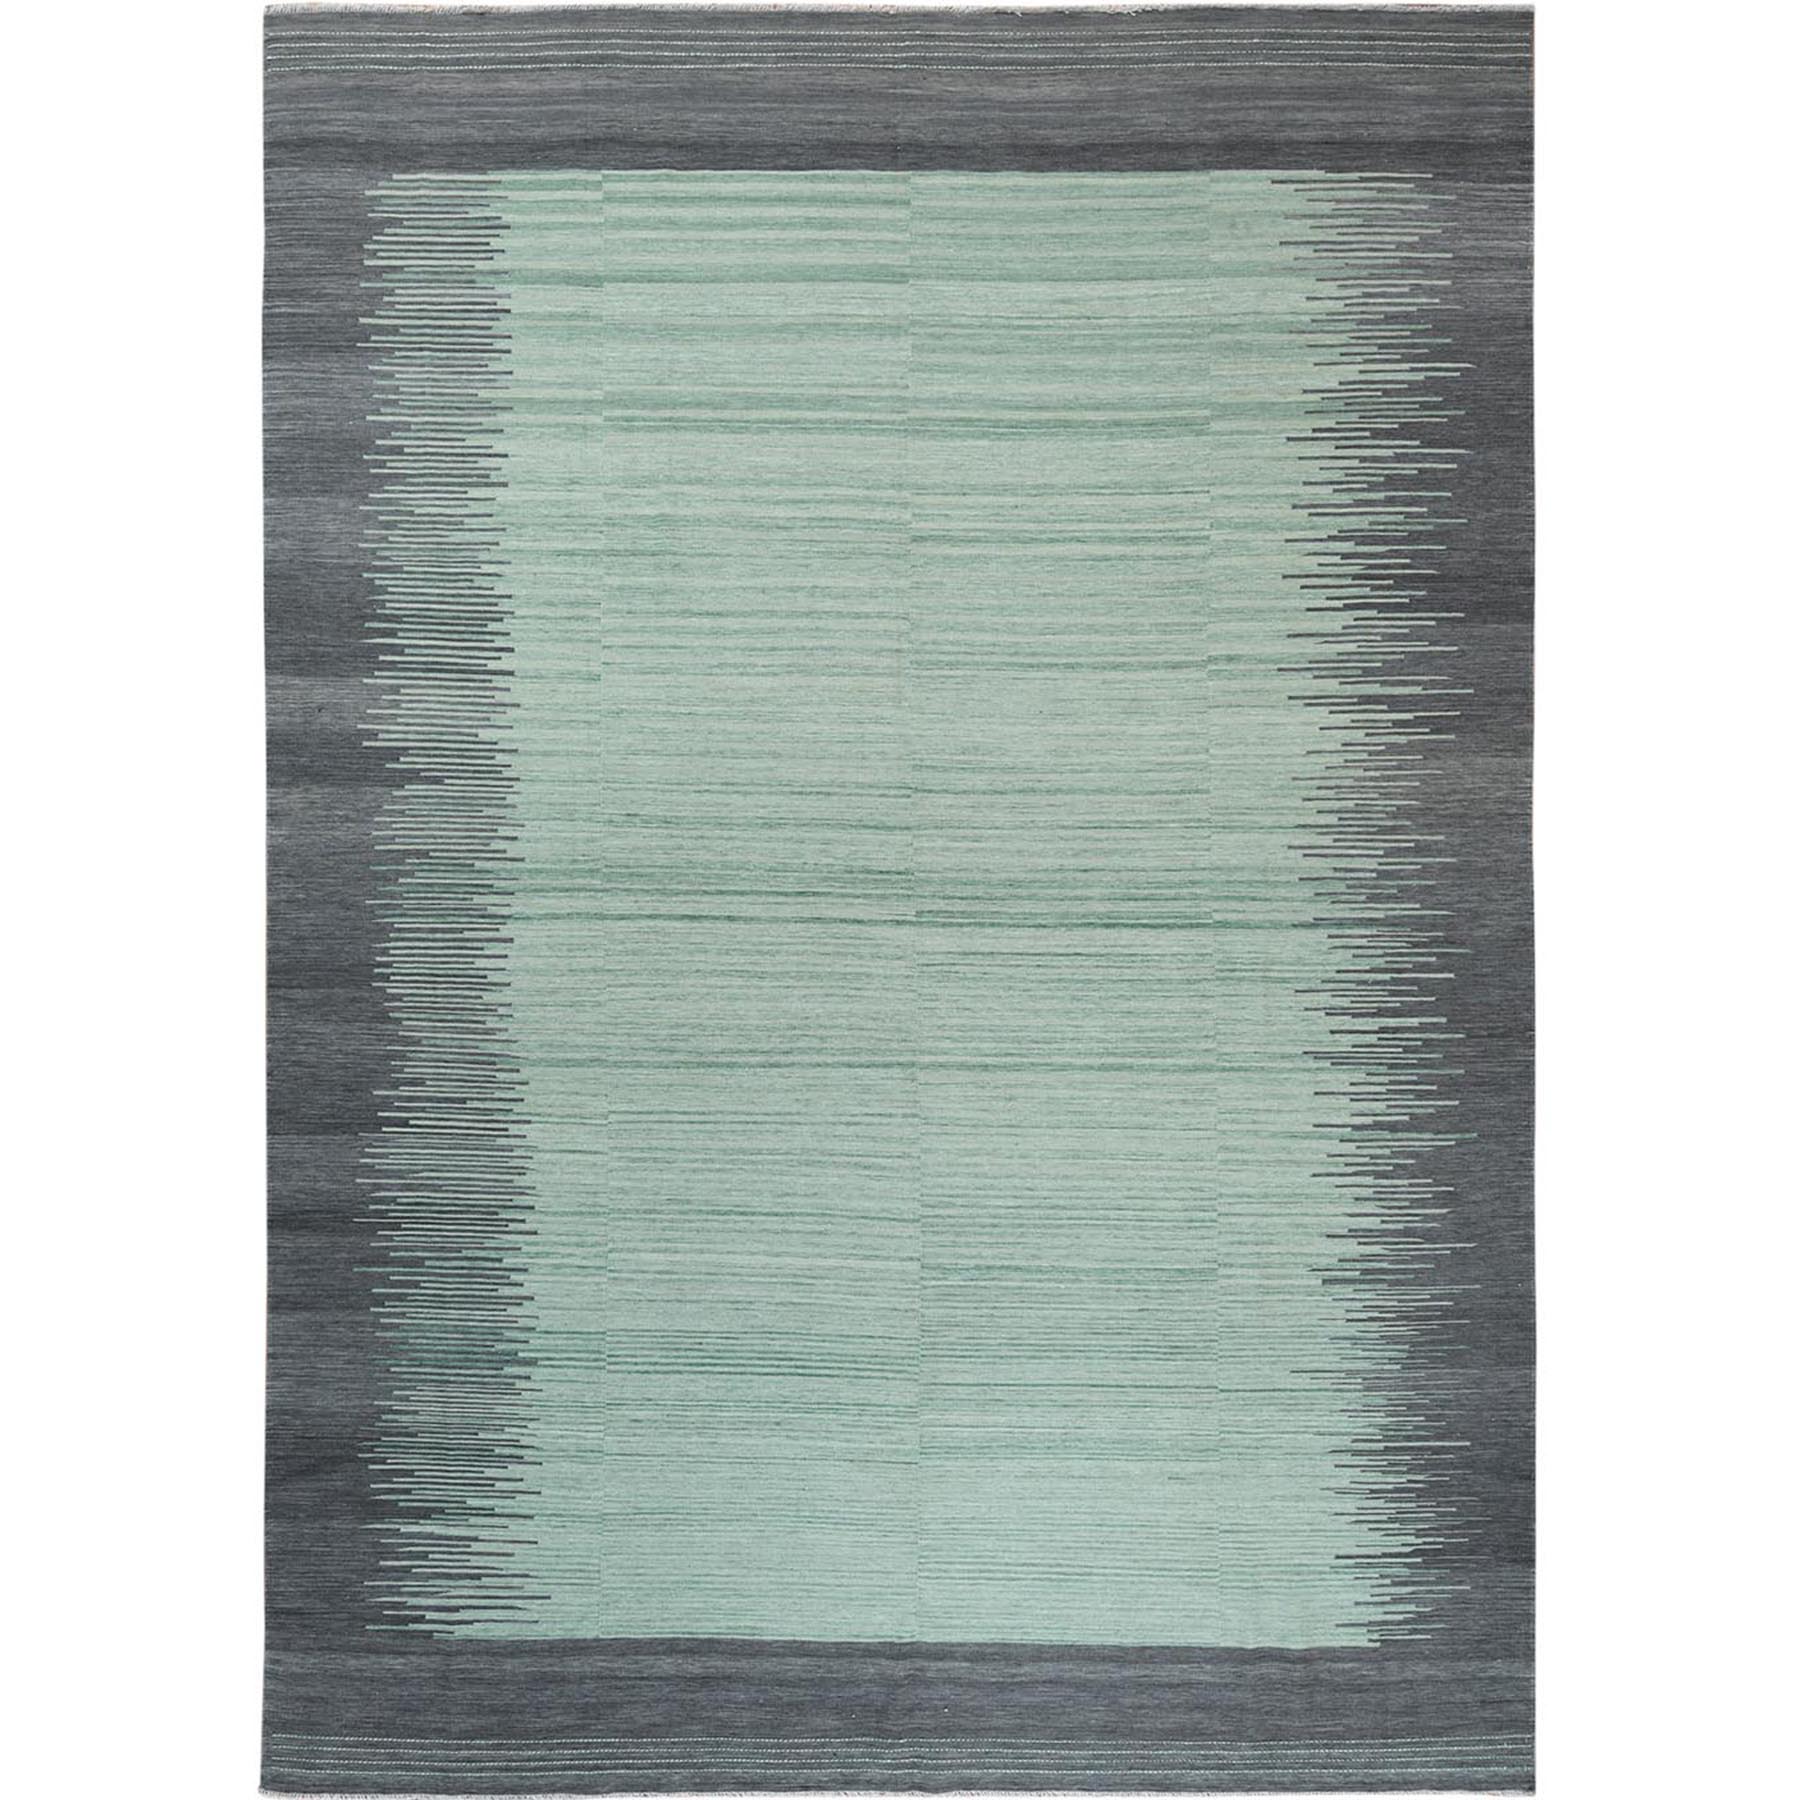 Modern & Contemporary Wool Hand-Woven Area Rug 10'0